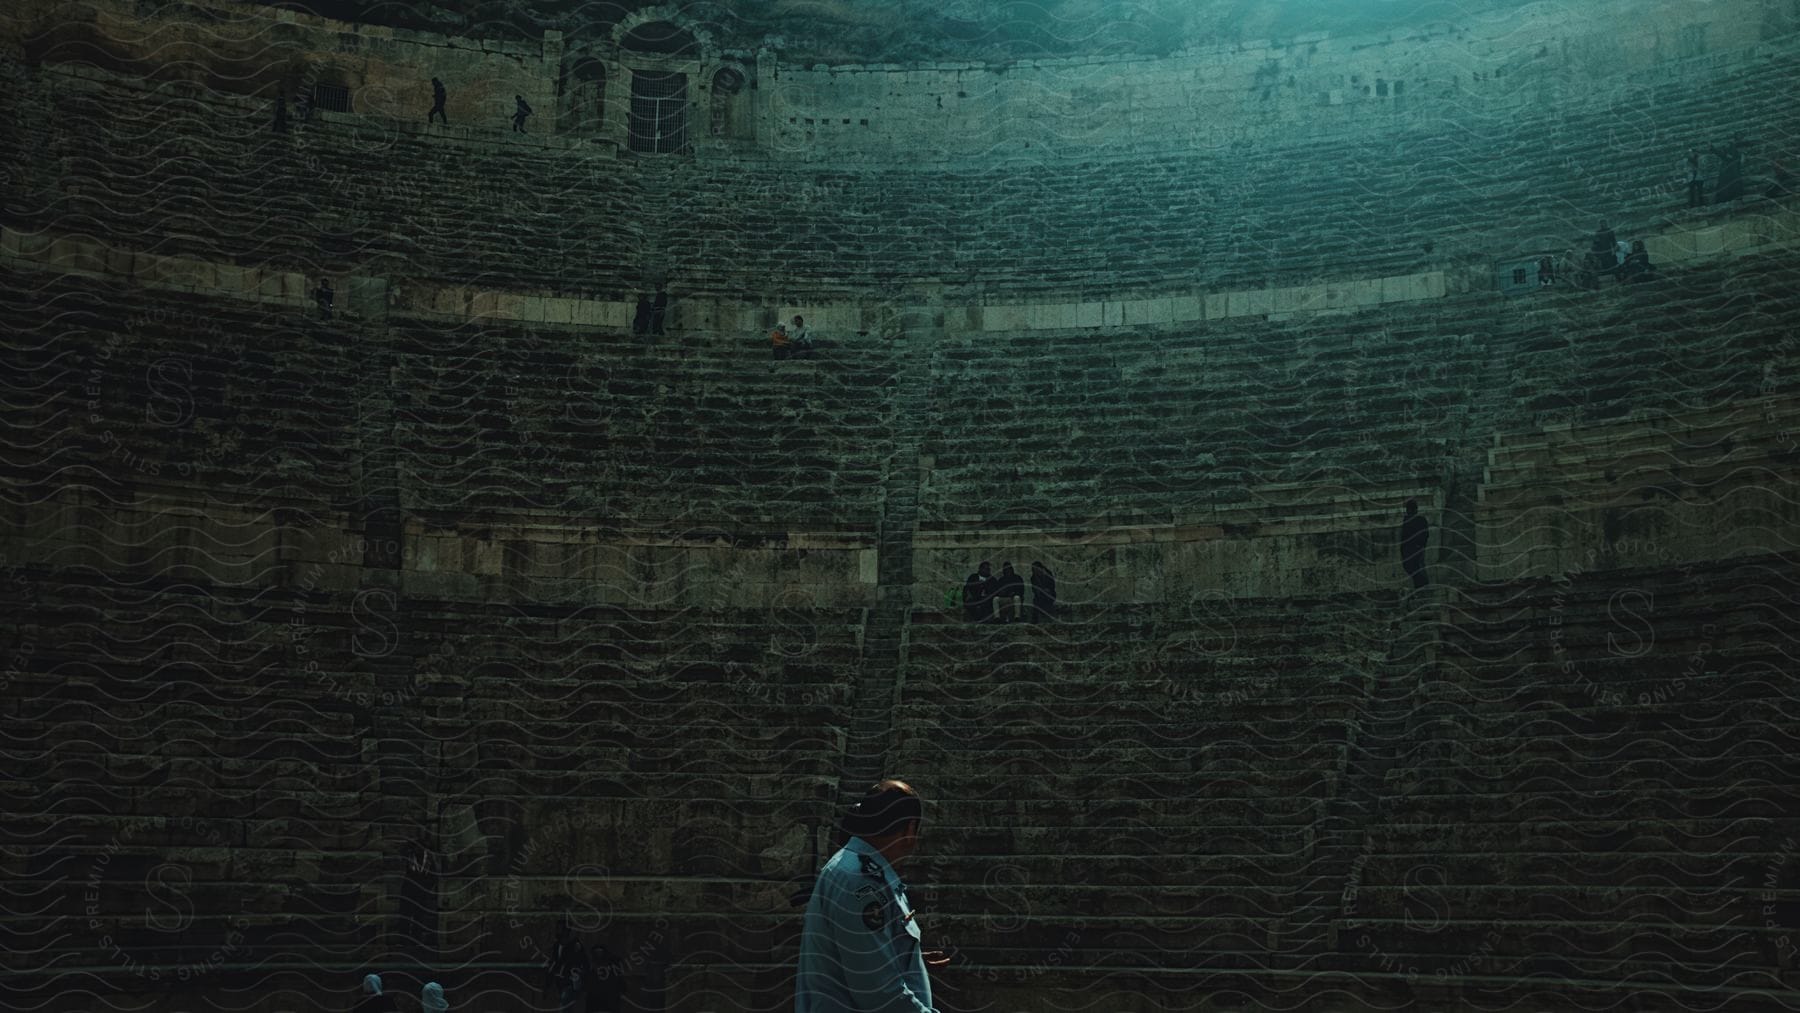 Interior of an arena with ancient ruins and tourists.